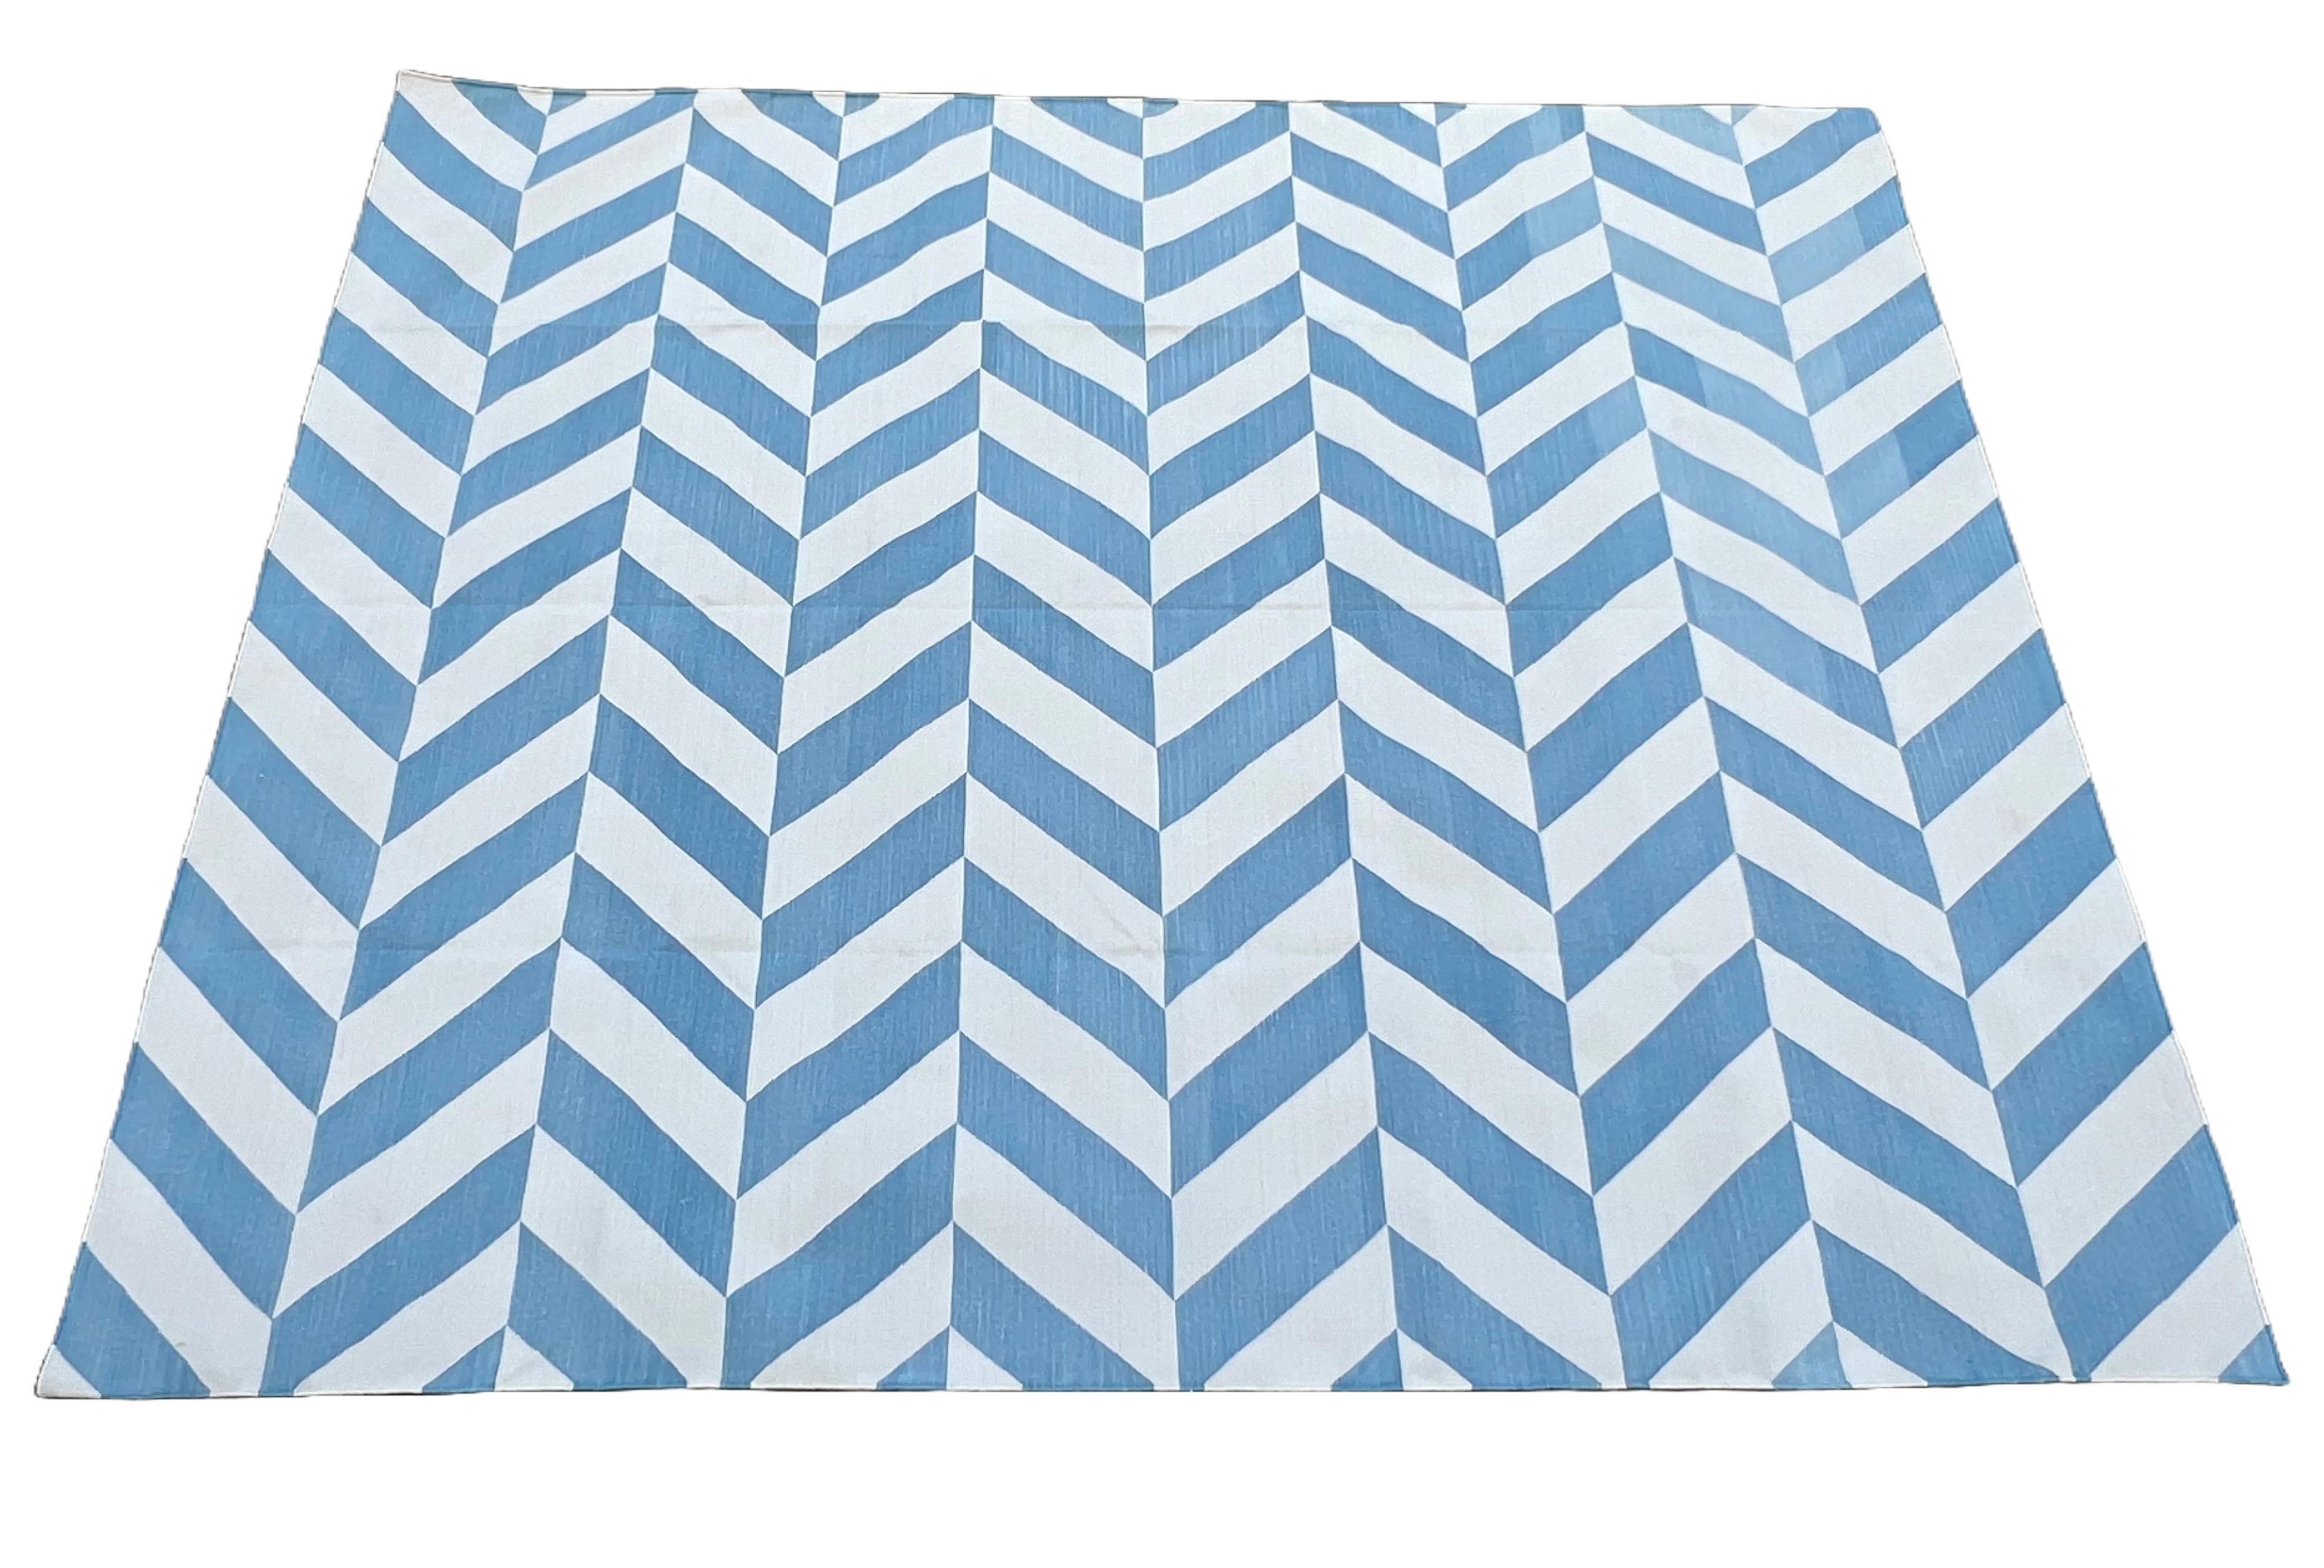 Hand-Woven Handmade Cotton Area Flat Weave Rug, Sky Blue And White Zig Zag Striped Dhurrie For Sale